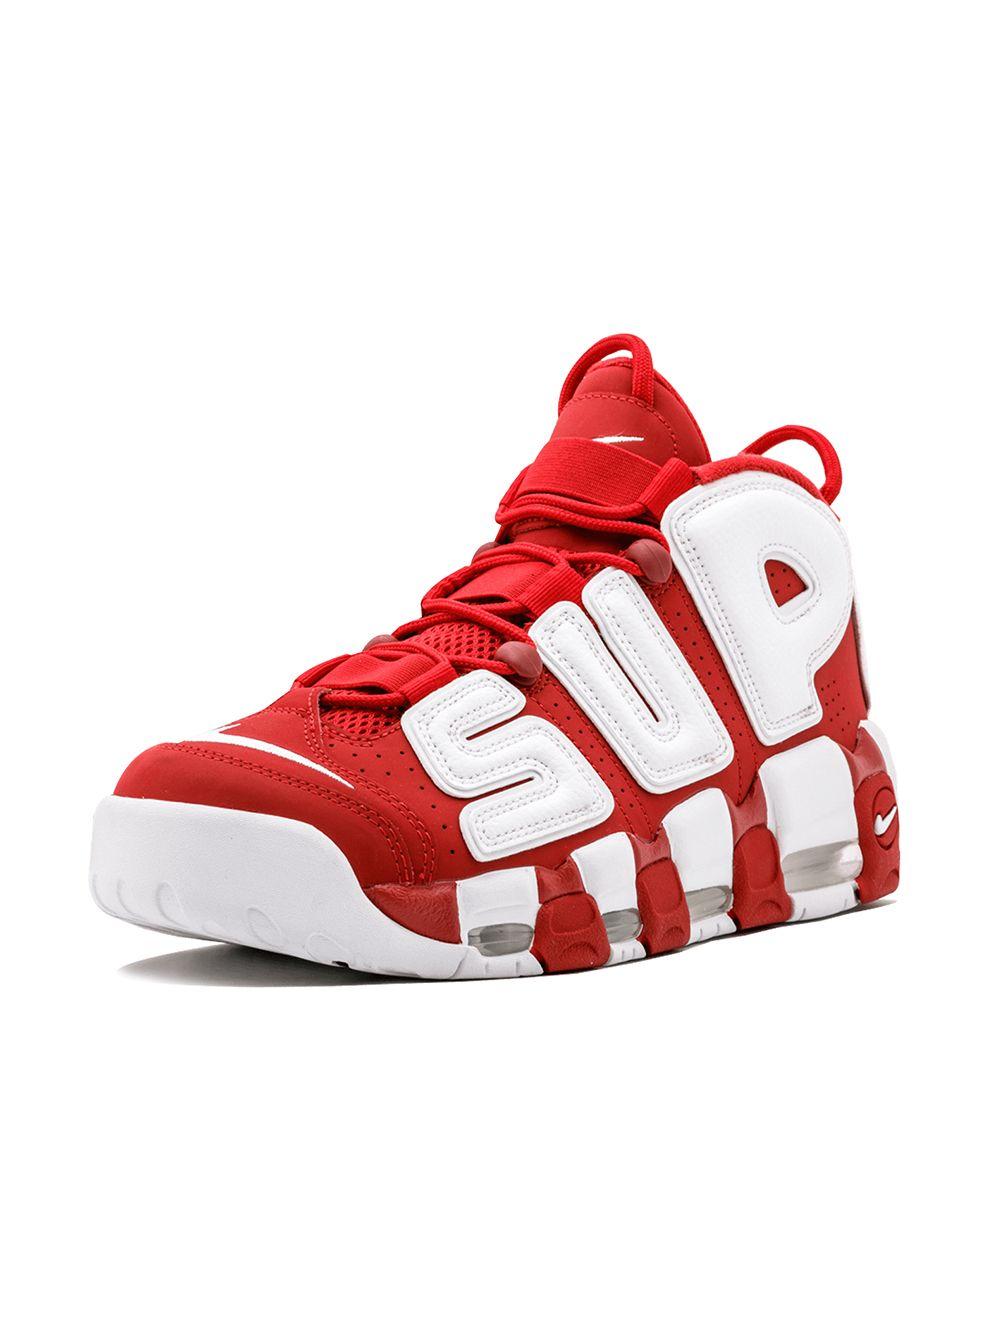 Supreme Suede X Nike Air More Uptempo Sneakers in Red for Men - Lyst